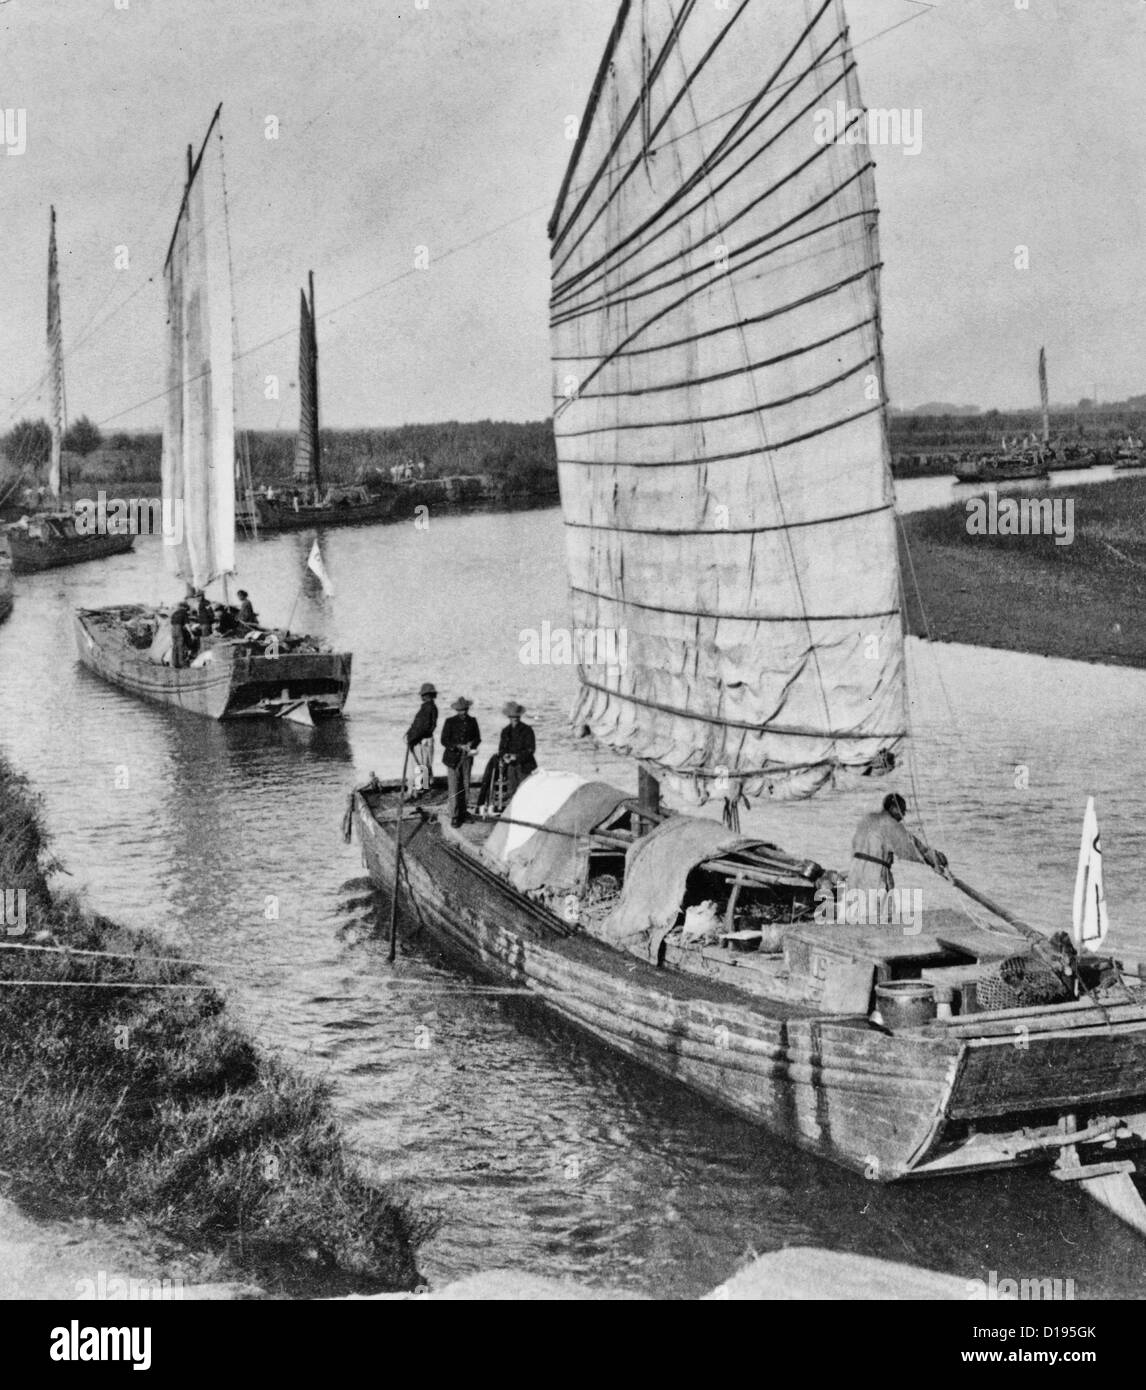 Junk flotilla on the Peiho River - transporting U.S. Army stores from Tientsin to Peking, China during Boxer Rebellion, circa 1900 Stock Photo